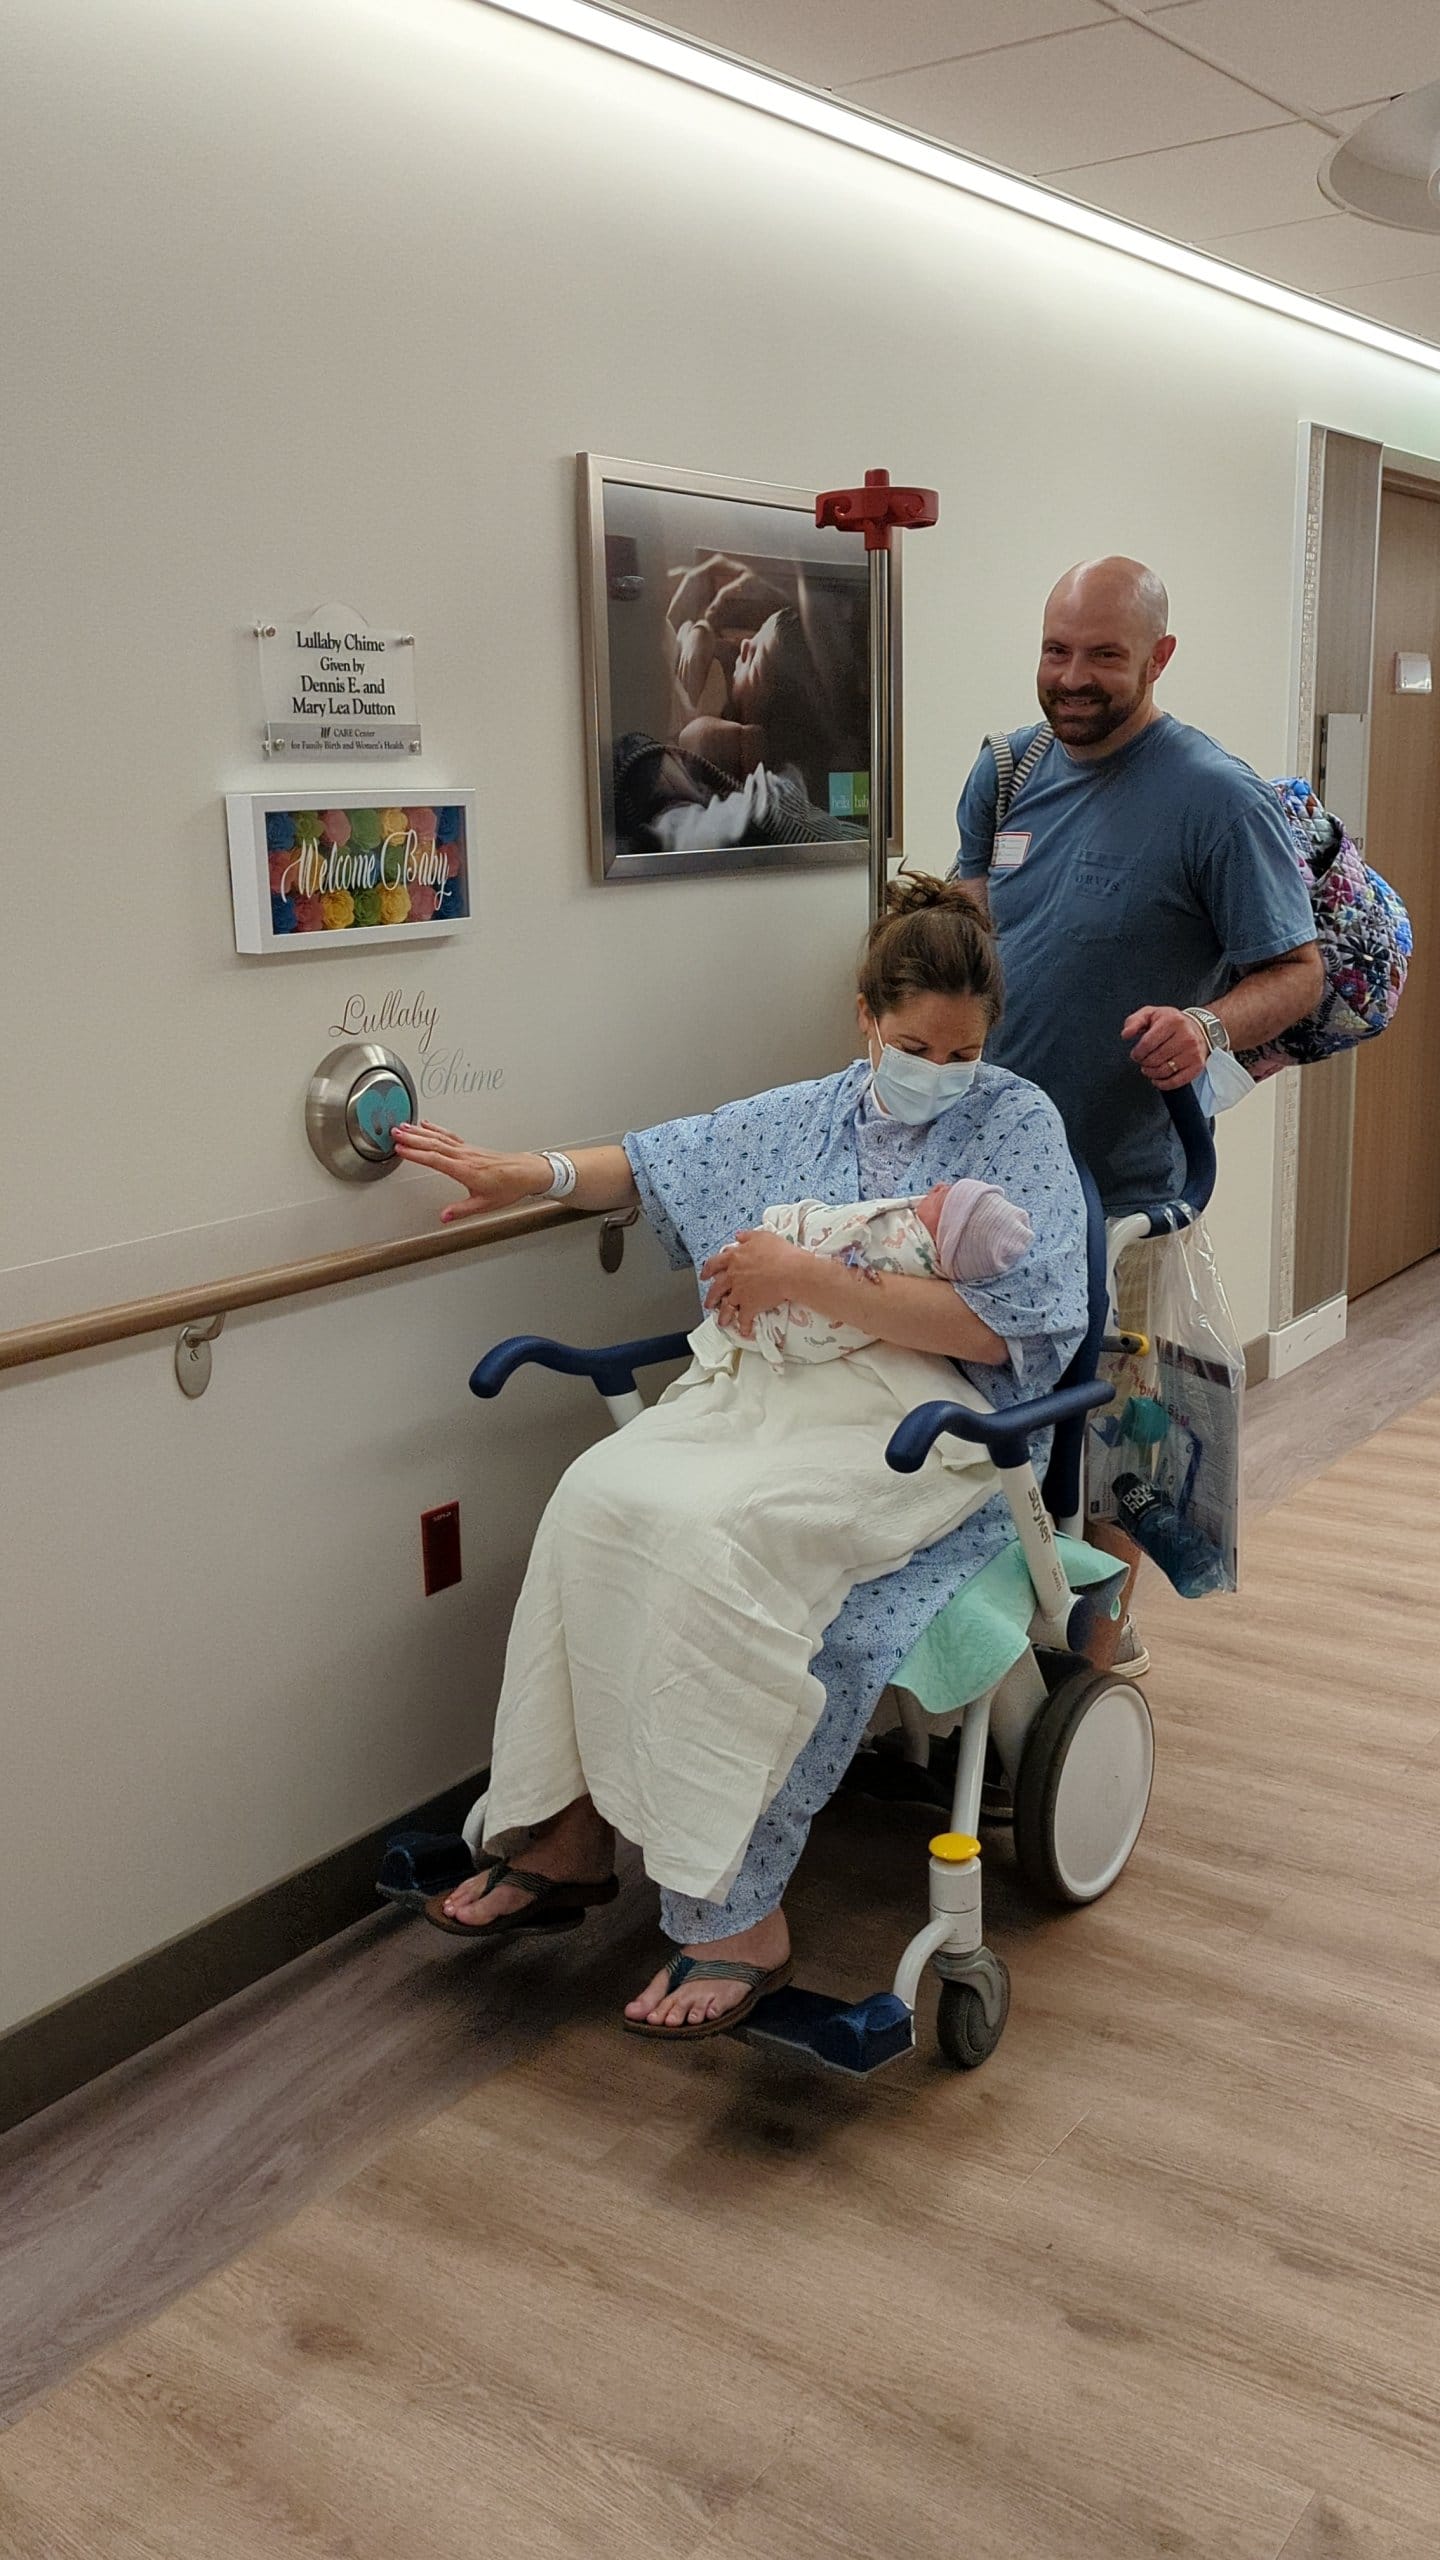 WHS patient pushing the lullaby chime button after giving birth. Husband pushing wheel chair. Baby in her arms